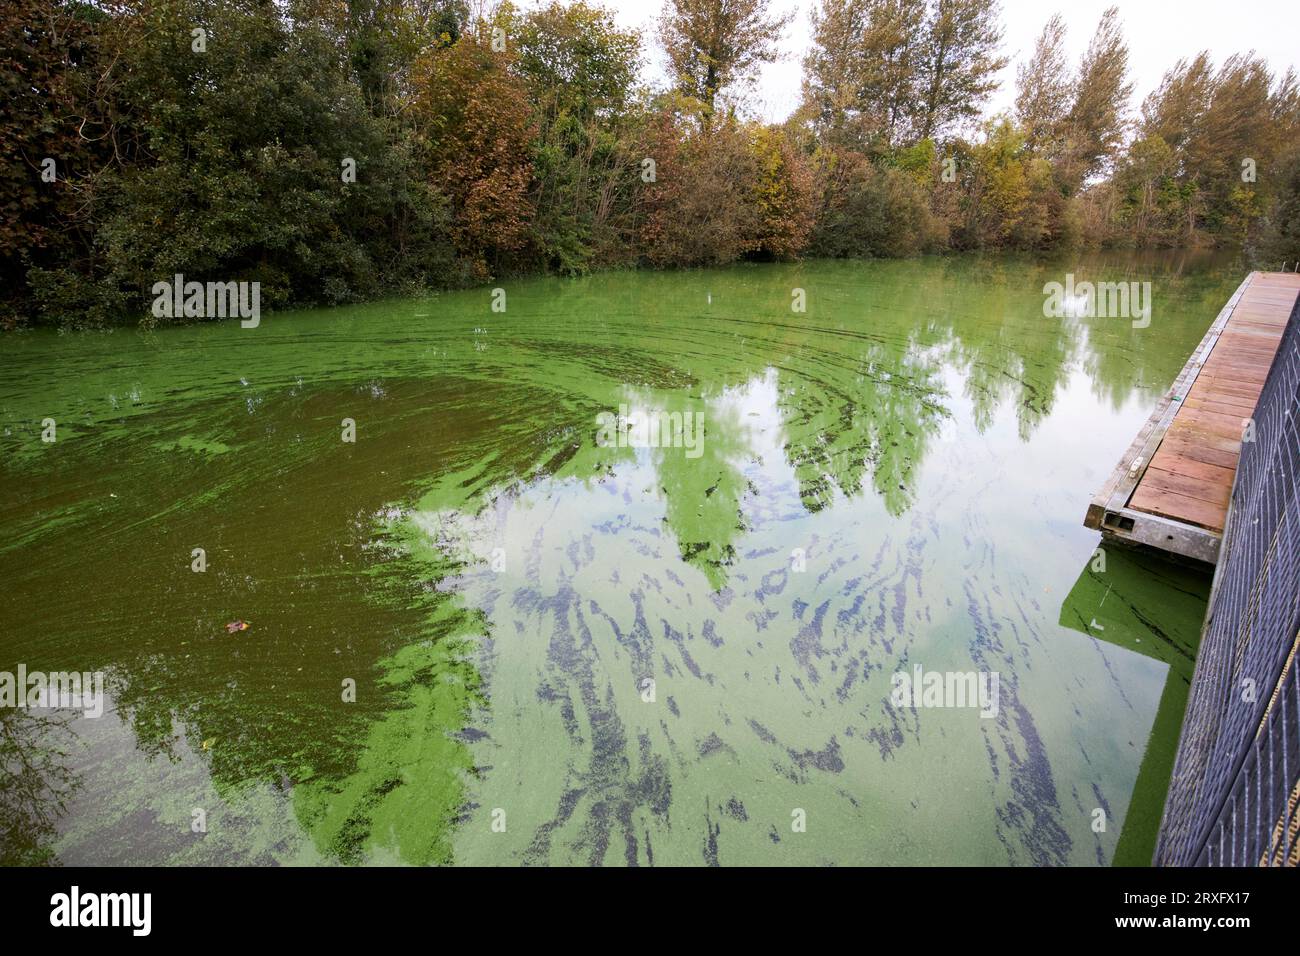 blue green algae outbreak on the toome canal Lough Neagh Northern Ireland UK Stock Photo